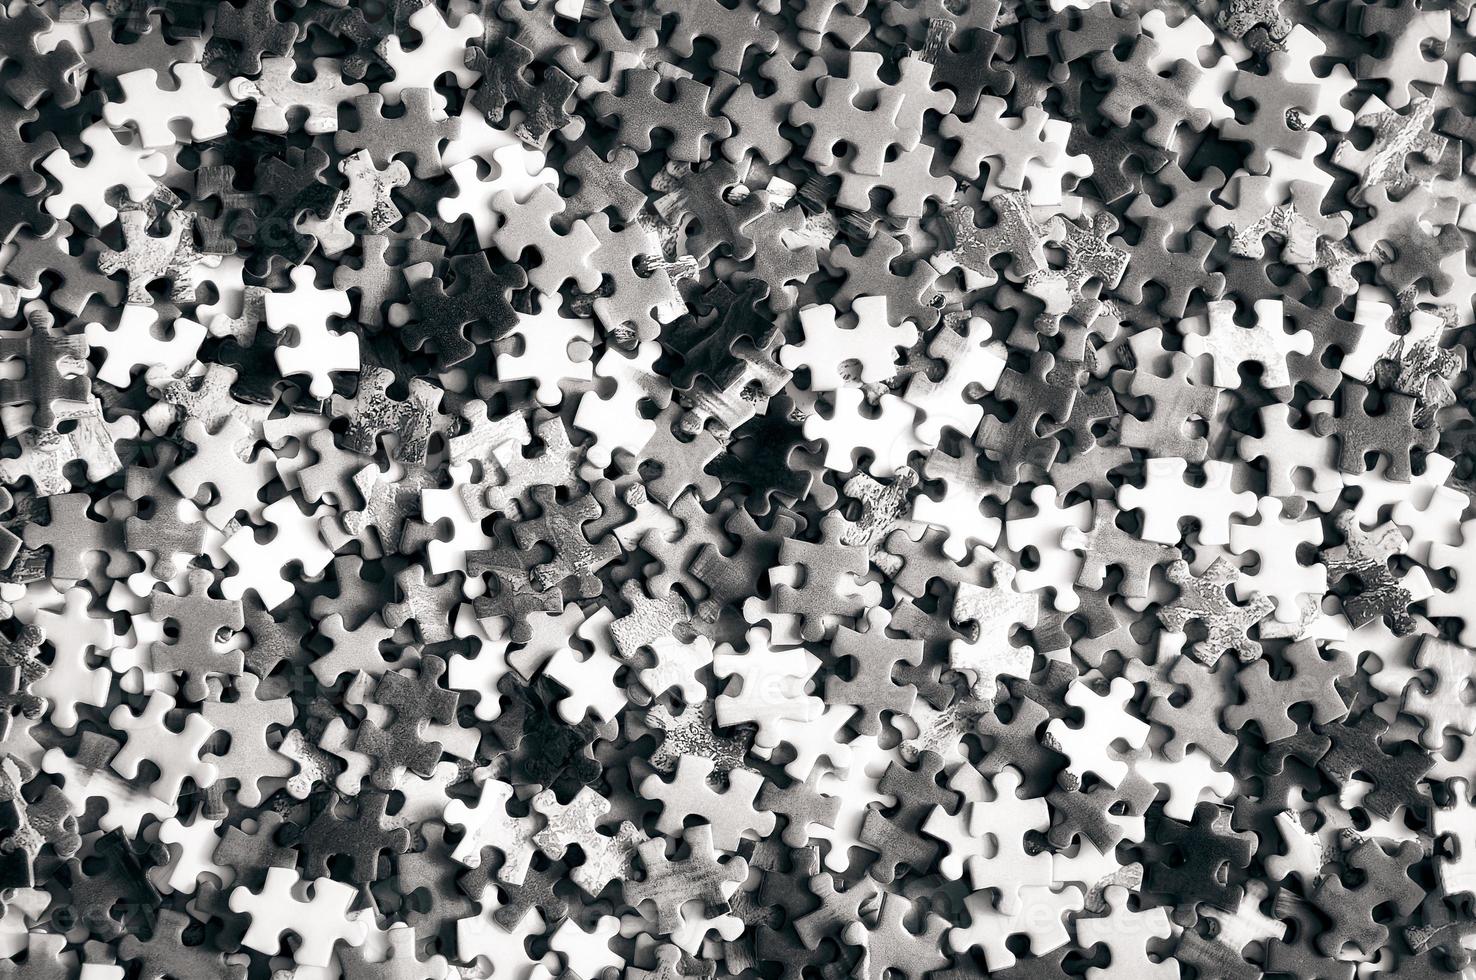 Pile of unfinished puzzle pieces in monochrome look photo